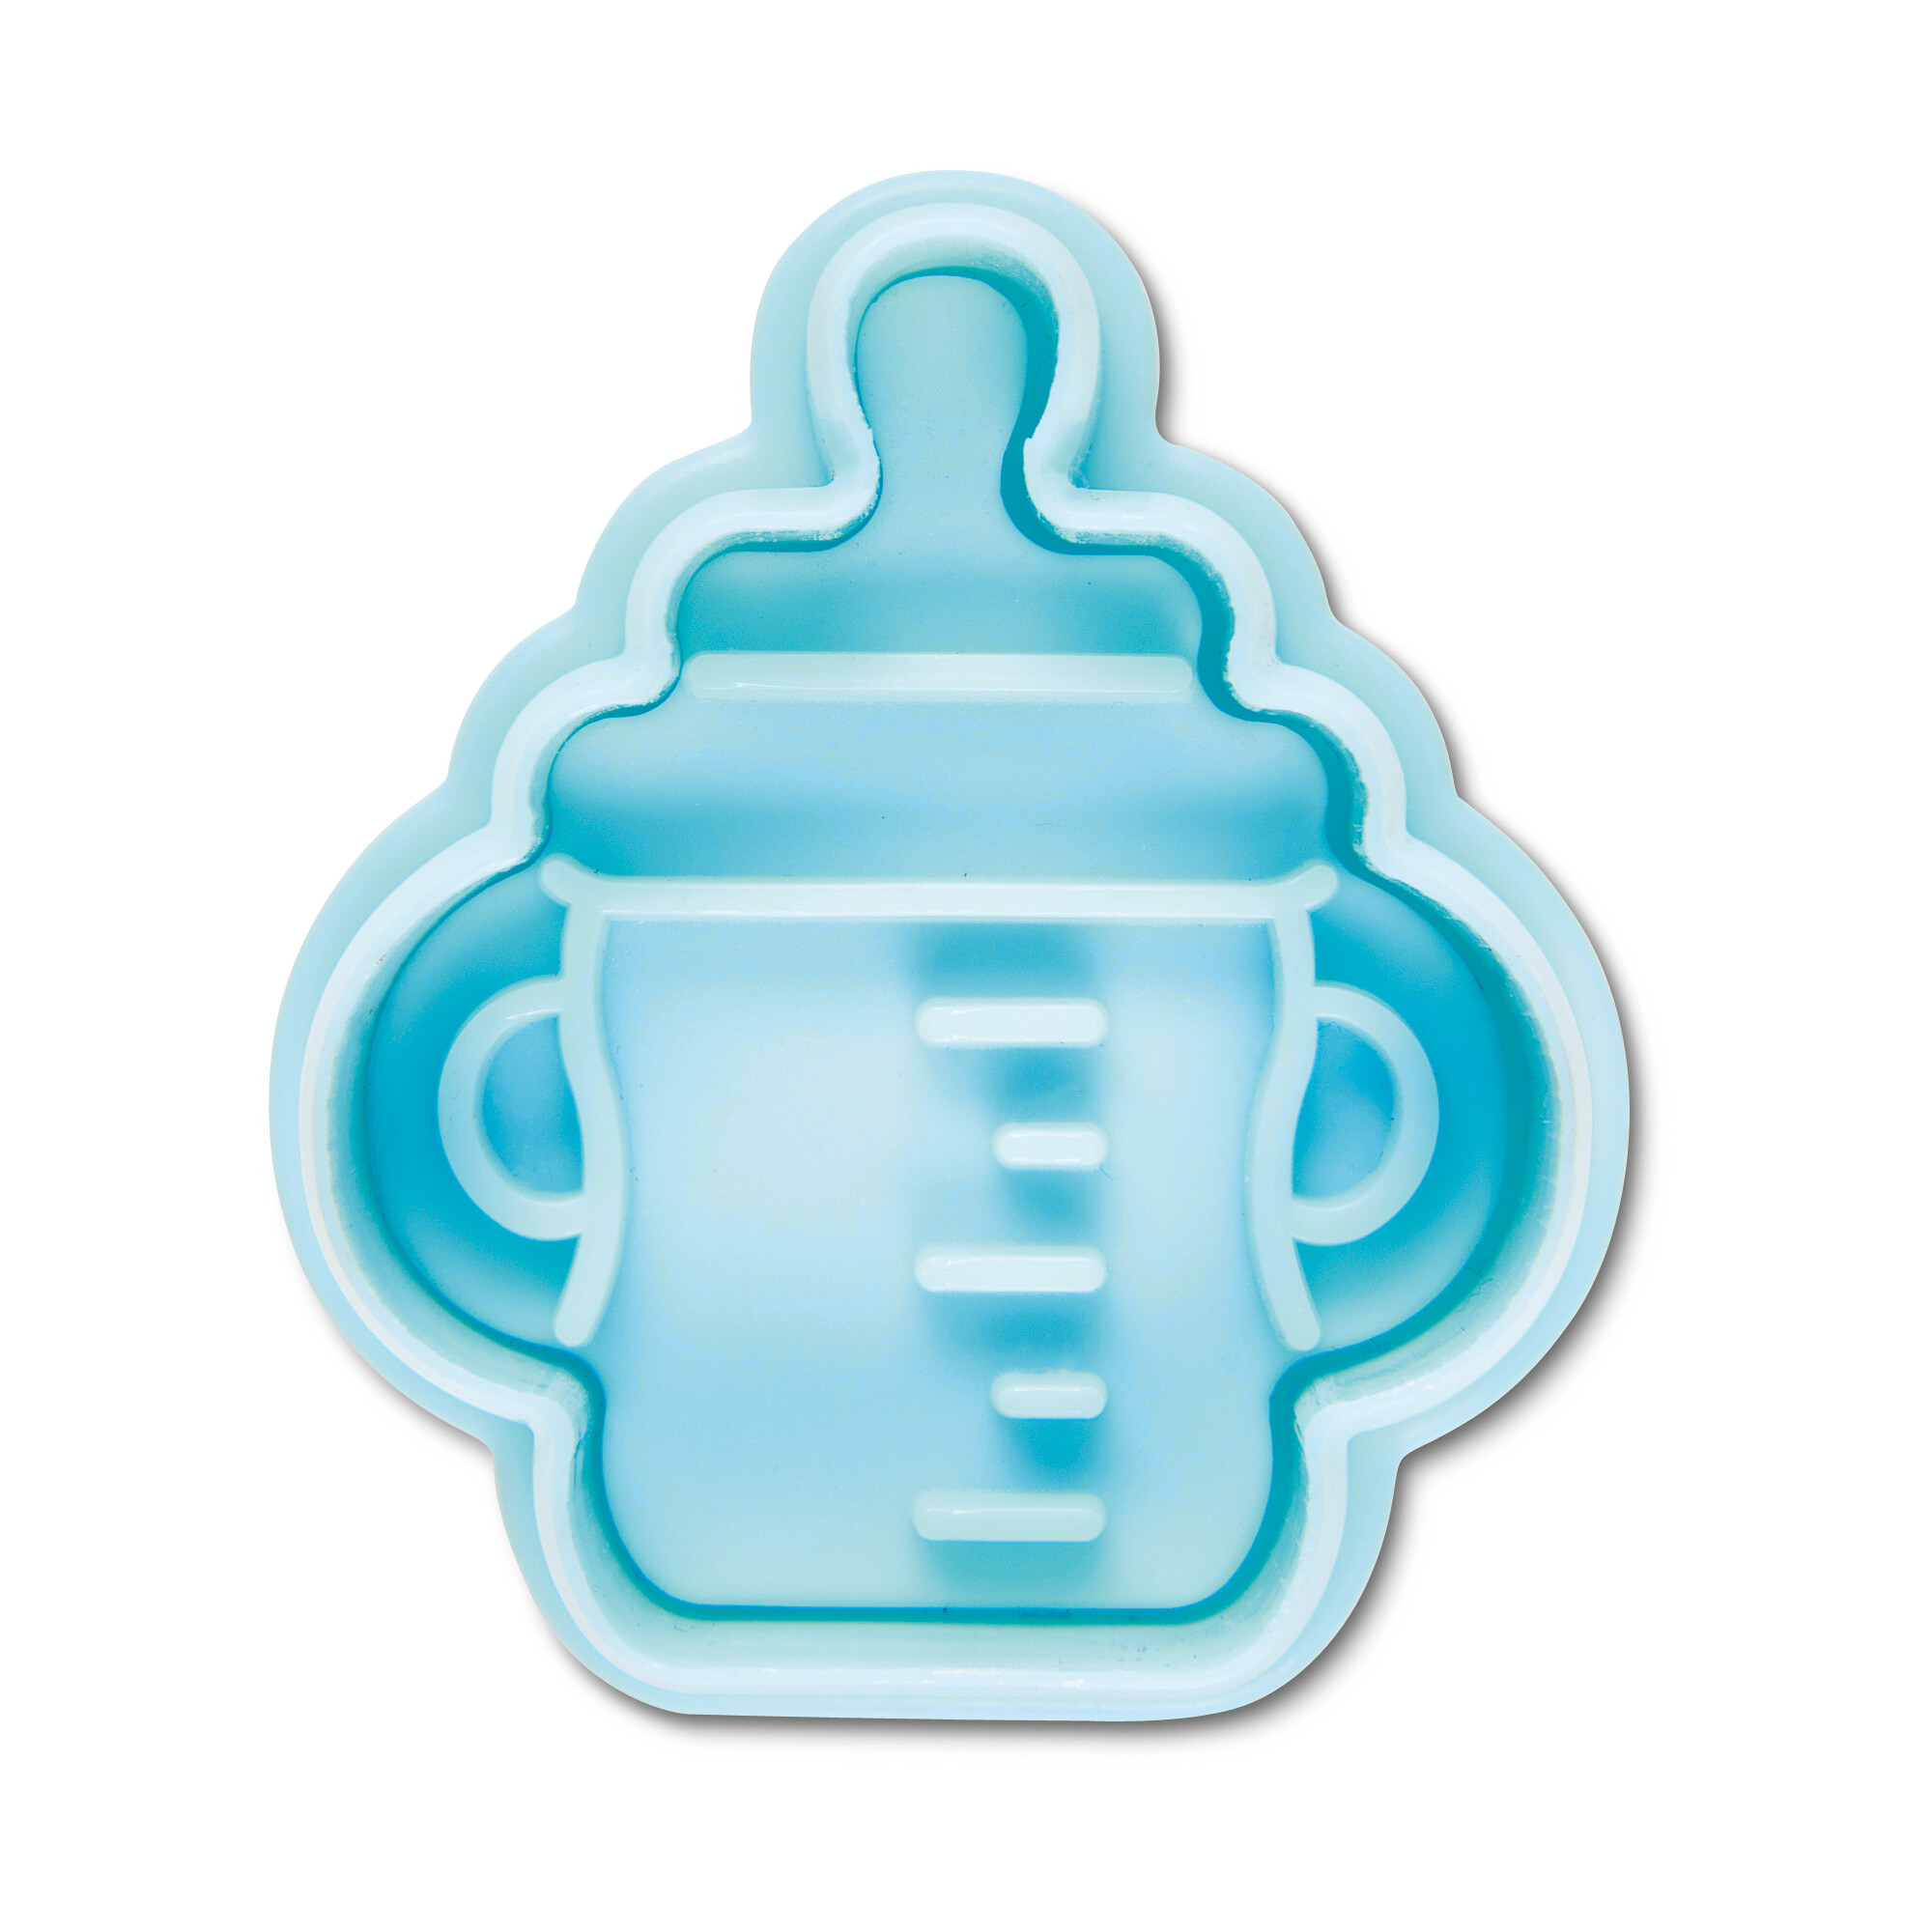 Cookie cutter with stamp and ejector – Baby bottle